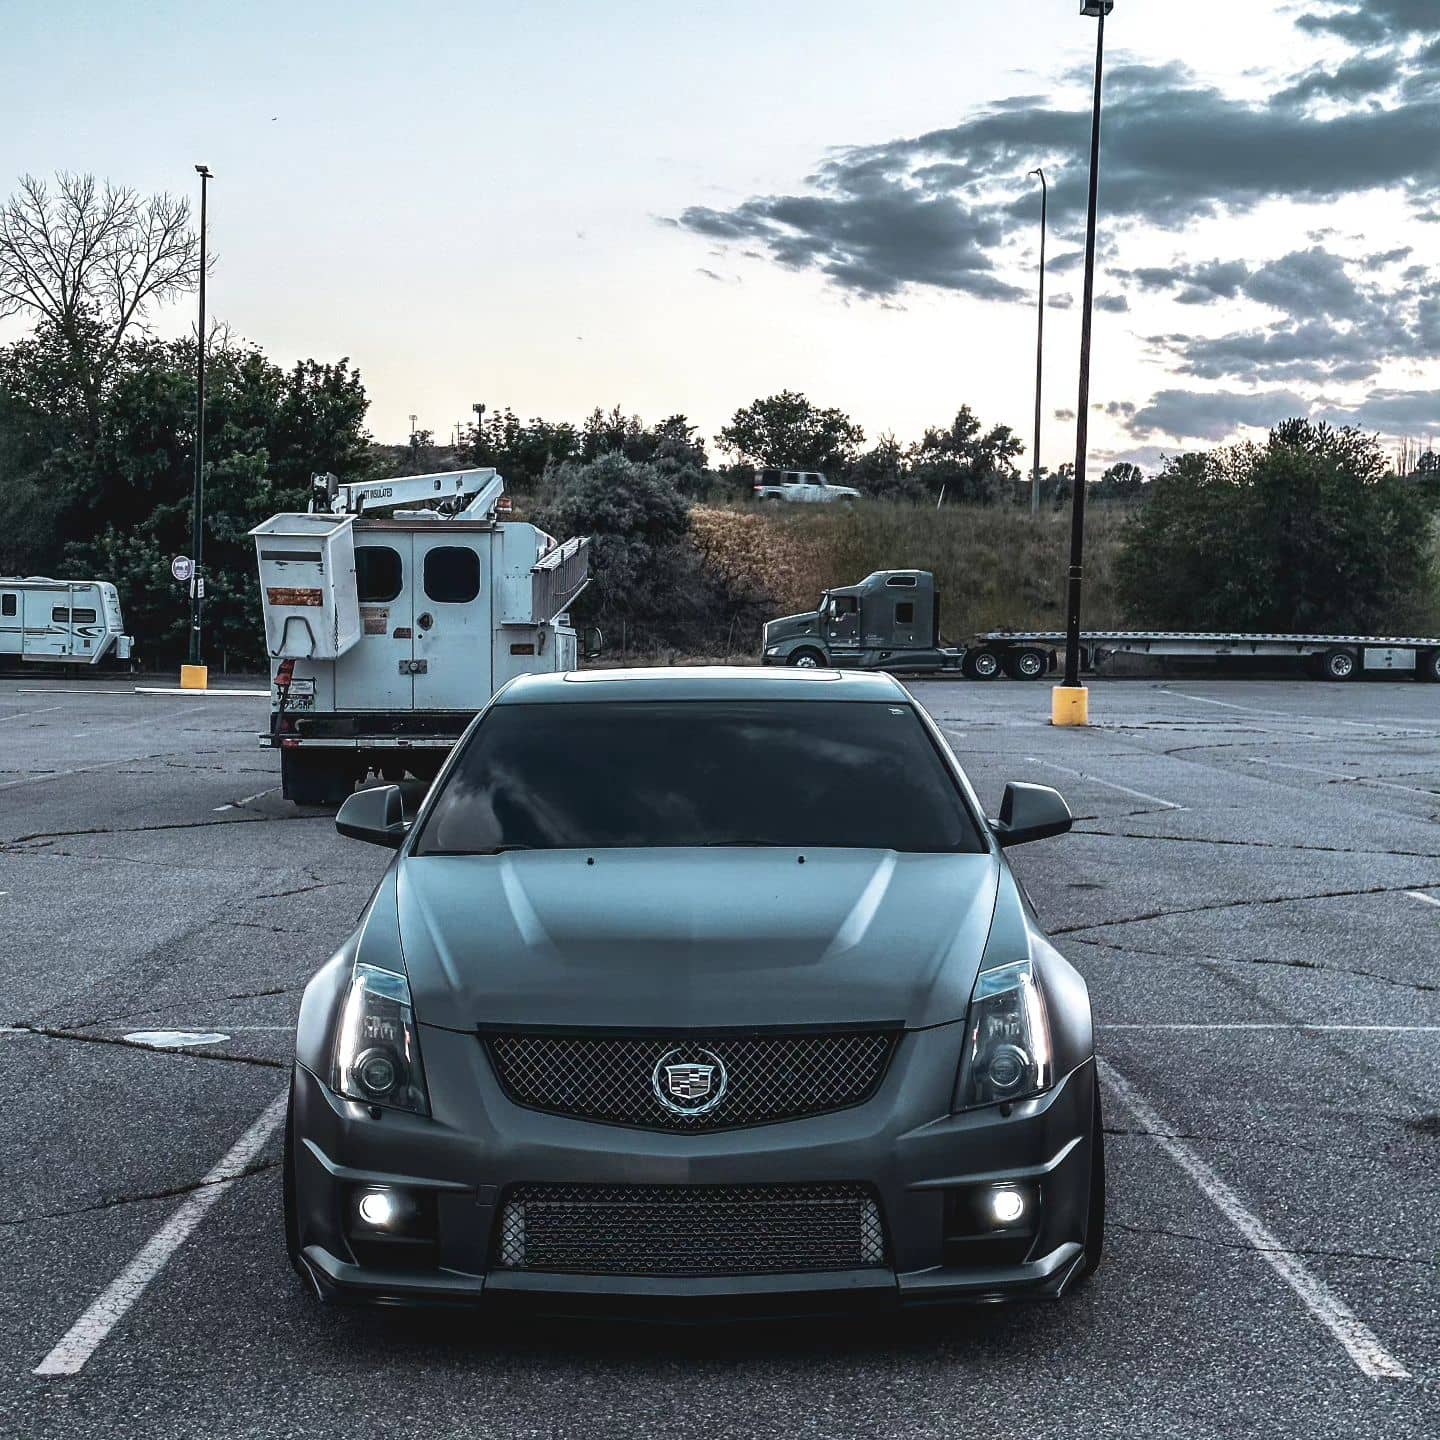 Blacked out De chrome cadillac CTS-V sedan with E&G mesh grille